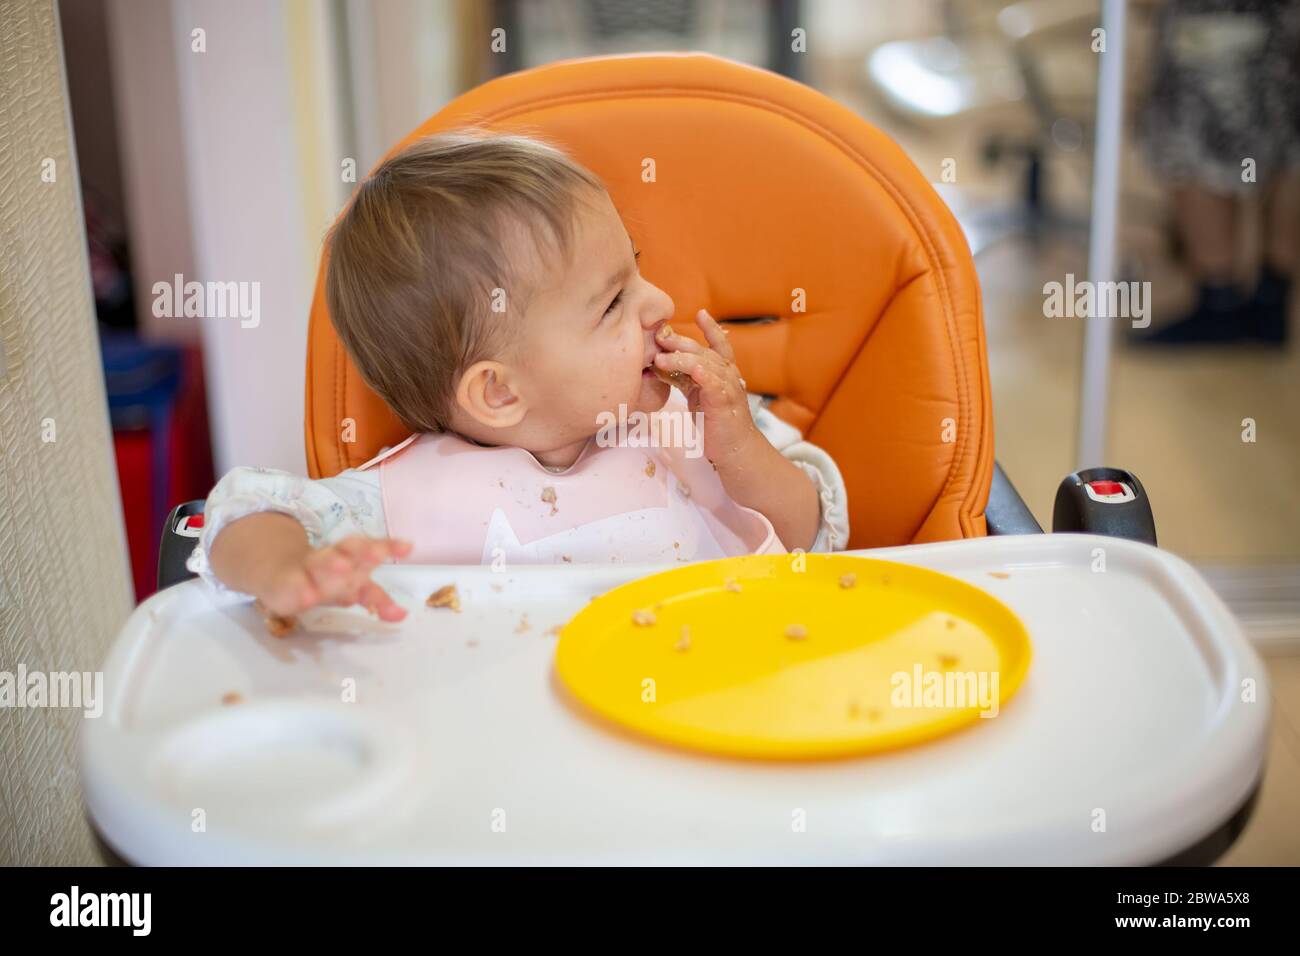 cute baby sits in an orange baby chair with a table with dirty hands and face, looks away and laughs. on table are crumbs and an orange plate. close Stock Photo